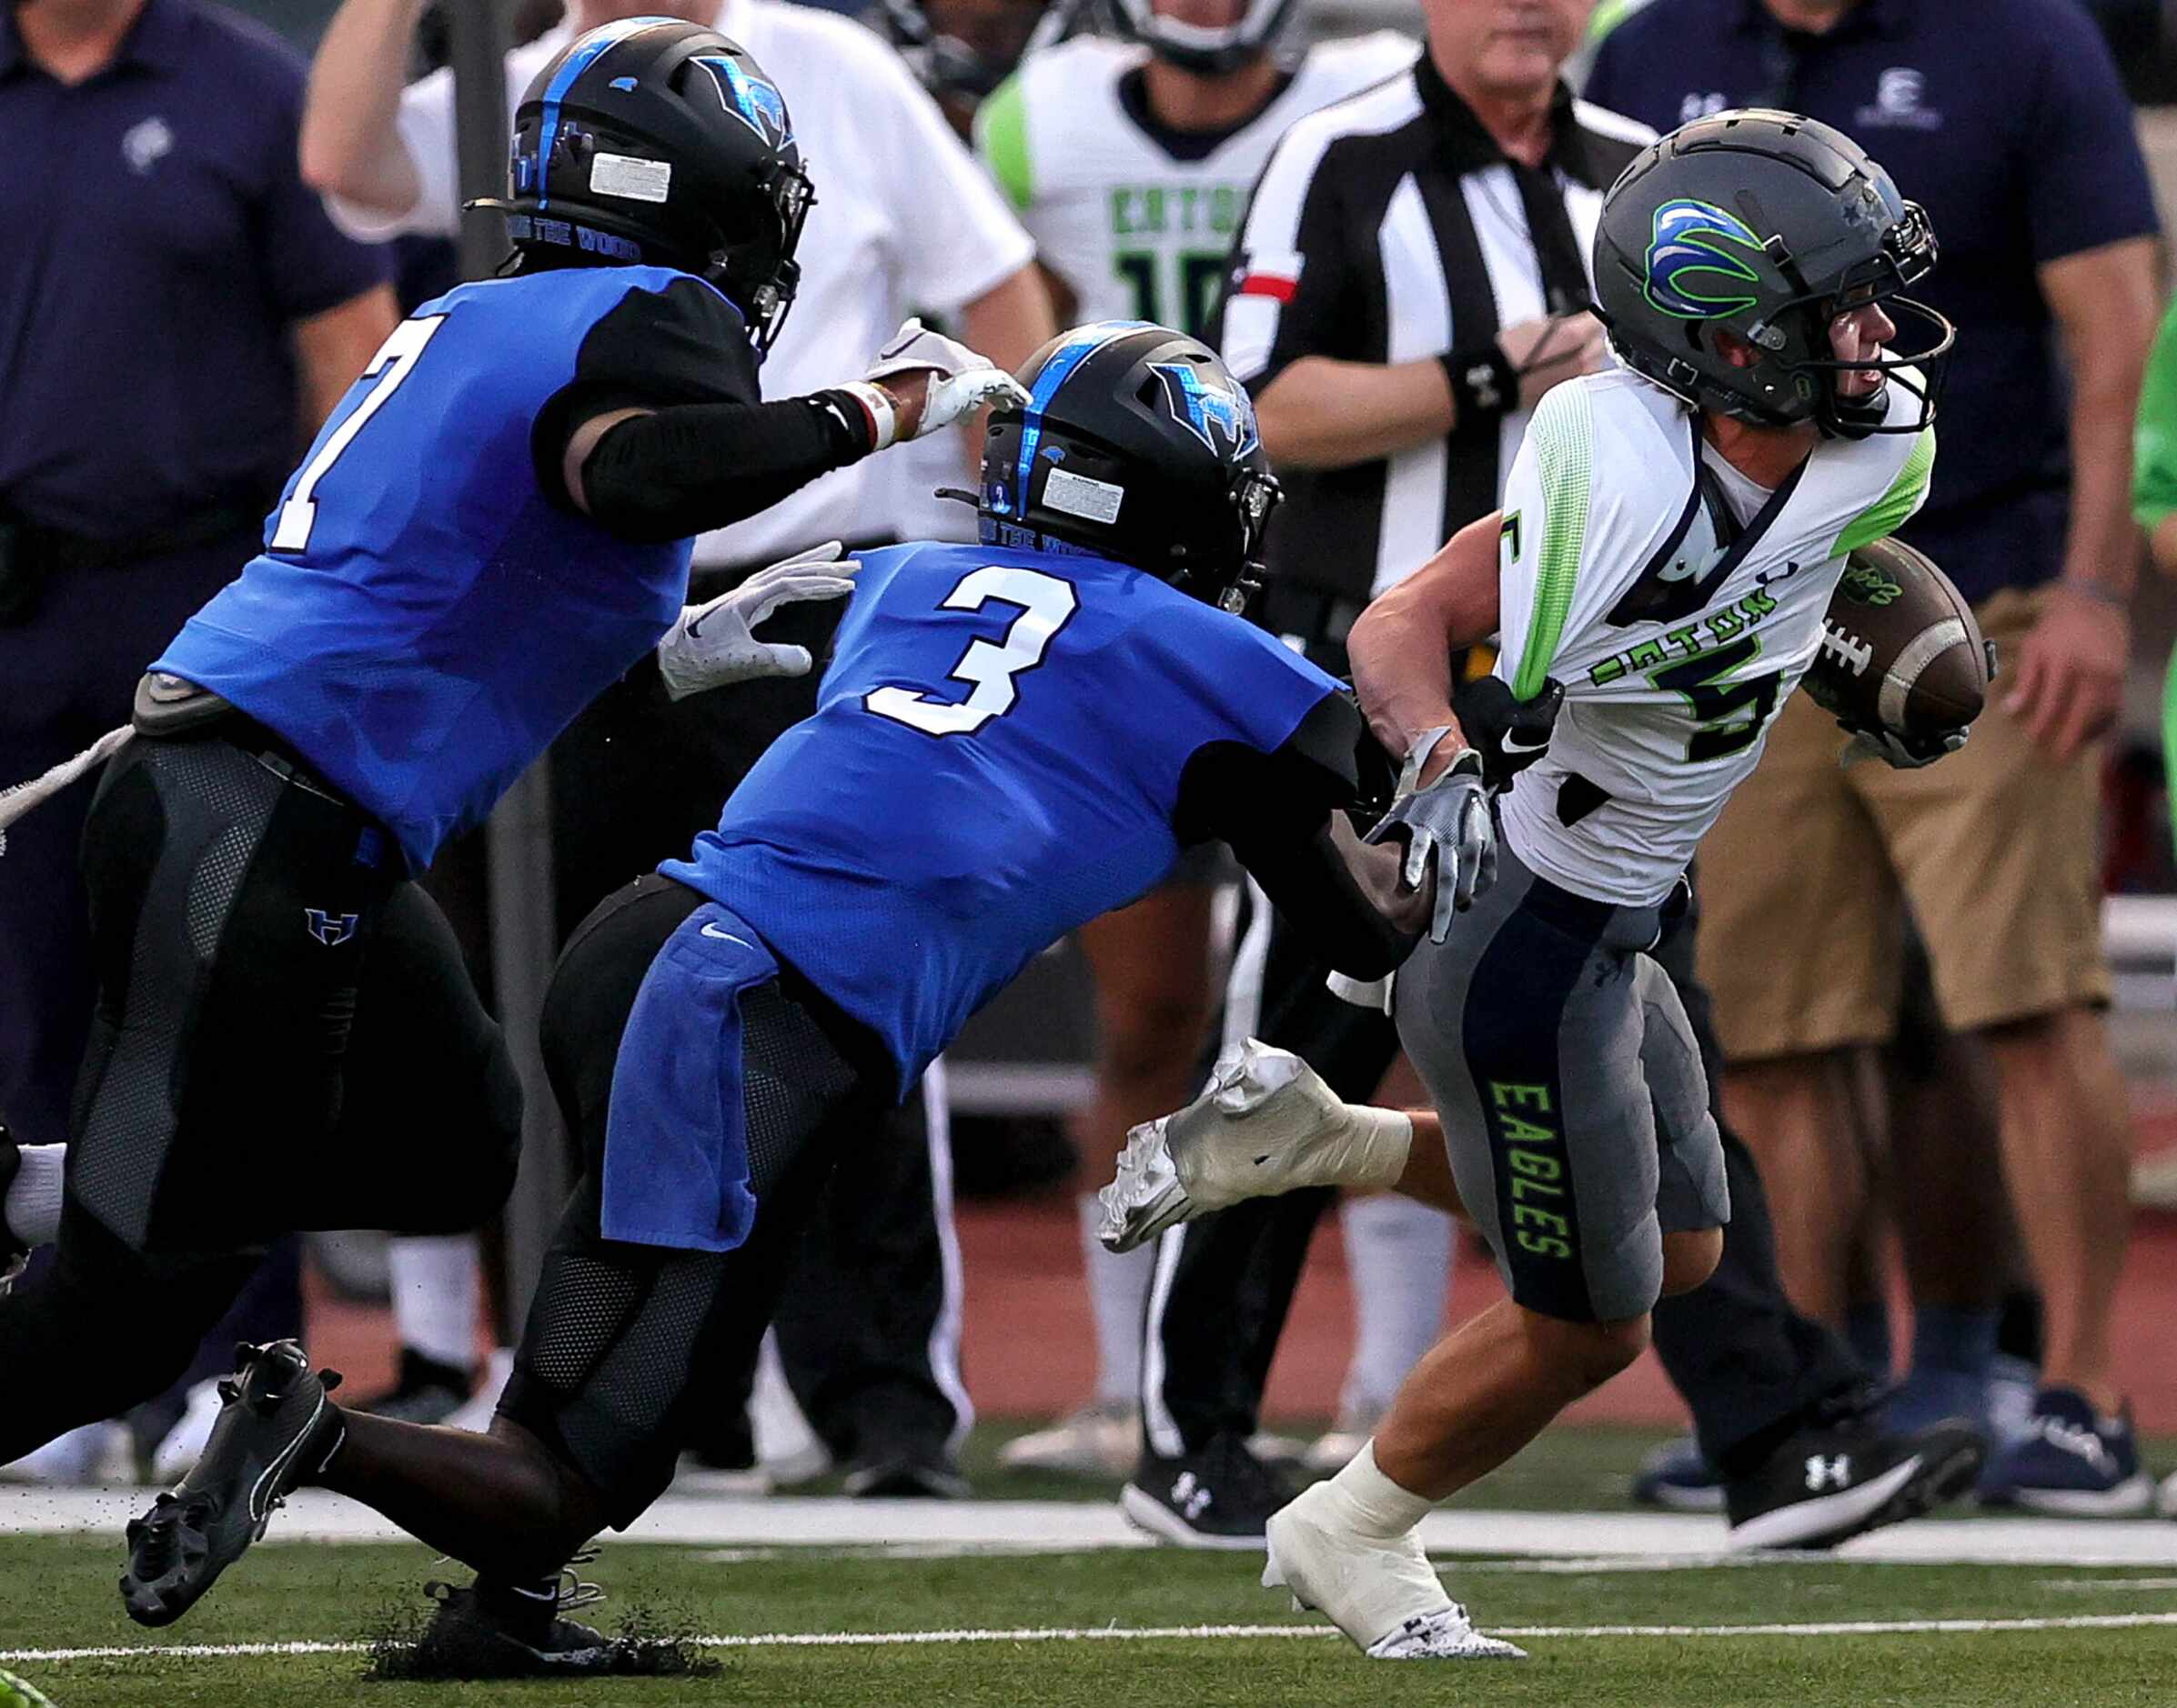 Eaton wide receiver Mason Stubbe (5) comes up with a reception and is pulled down by Hebron...